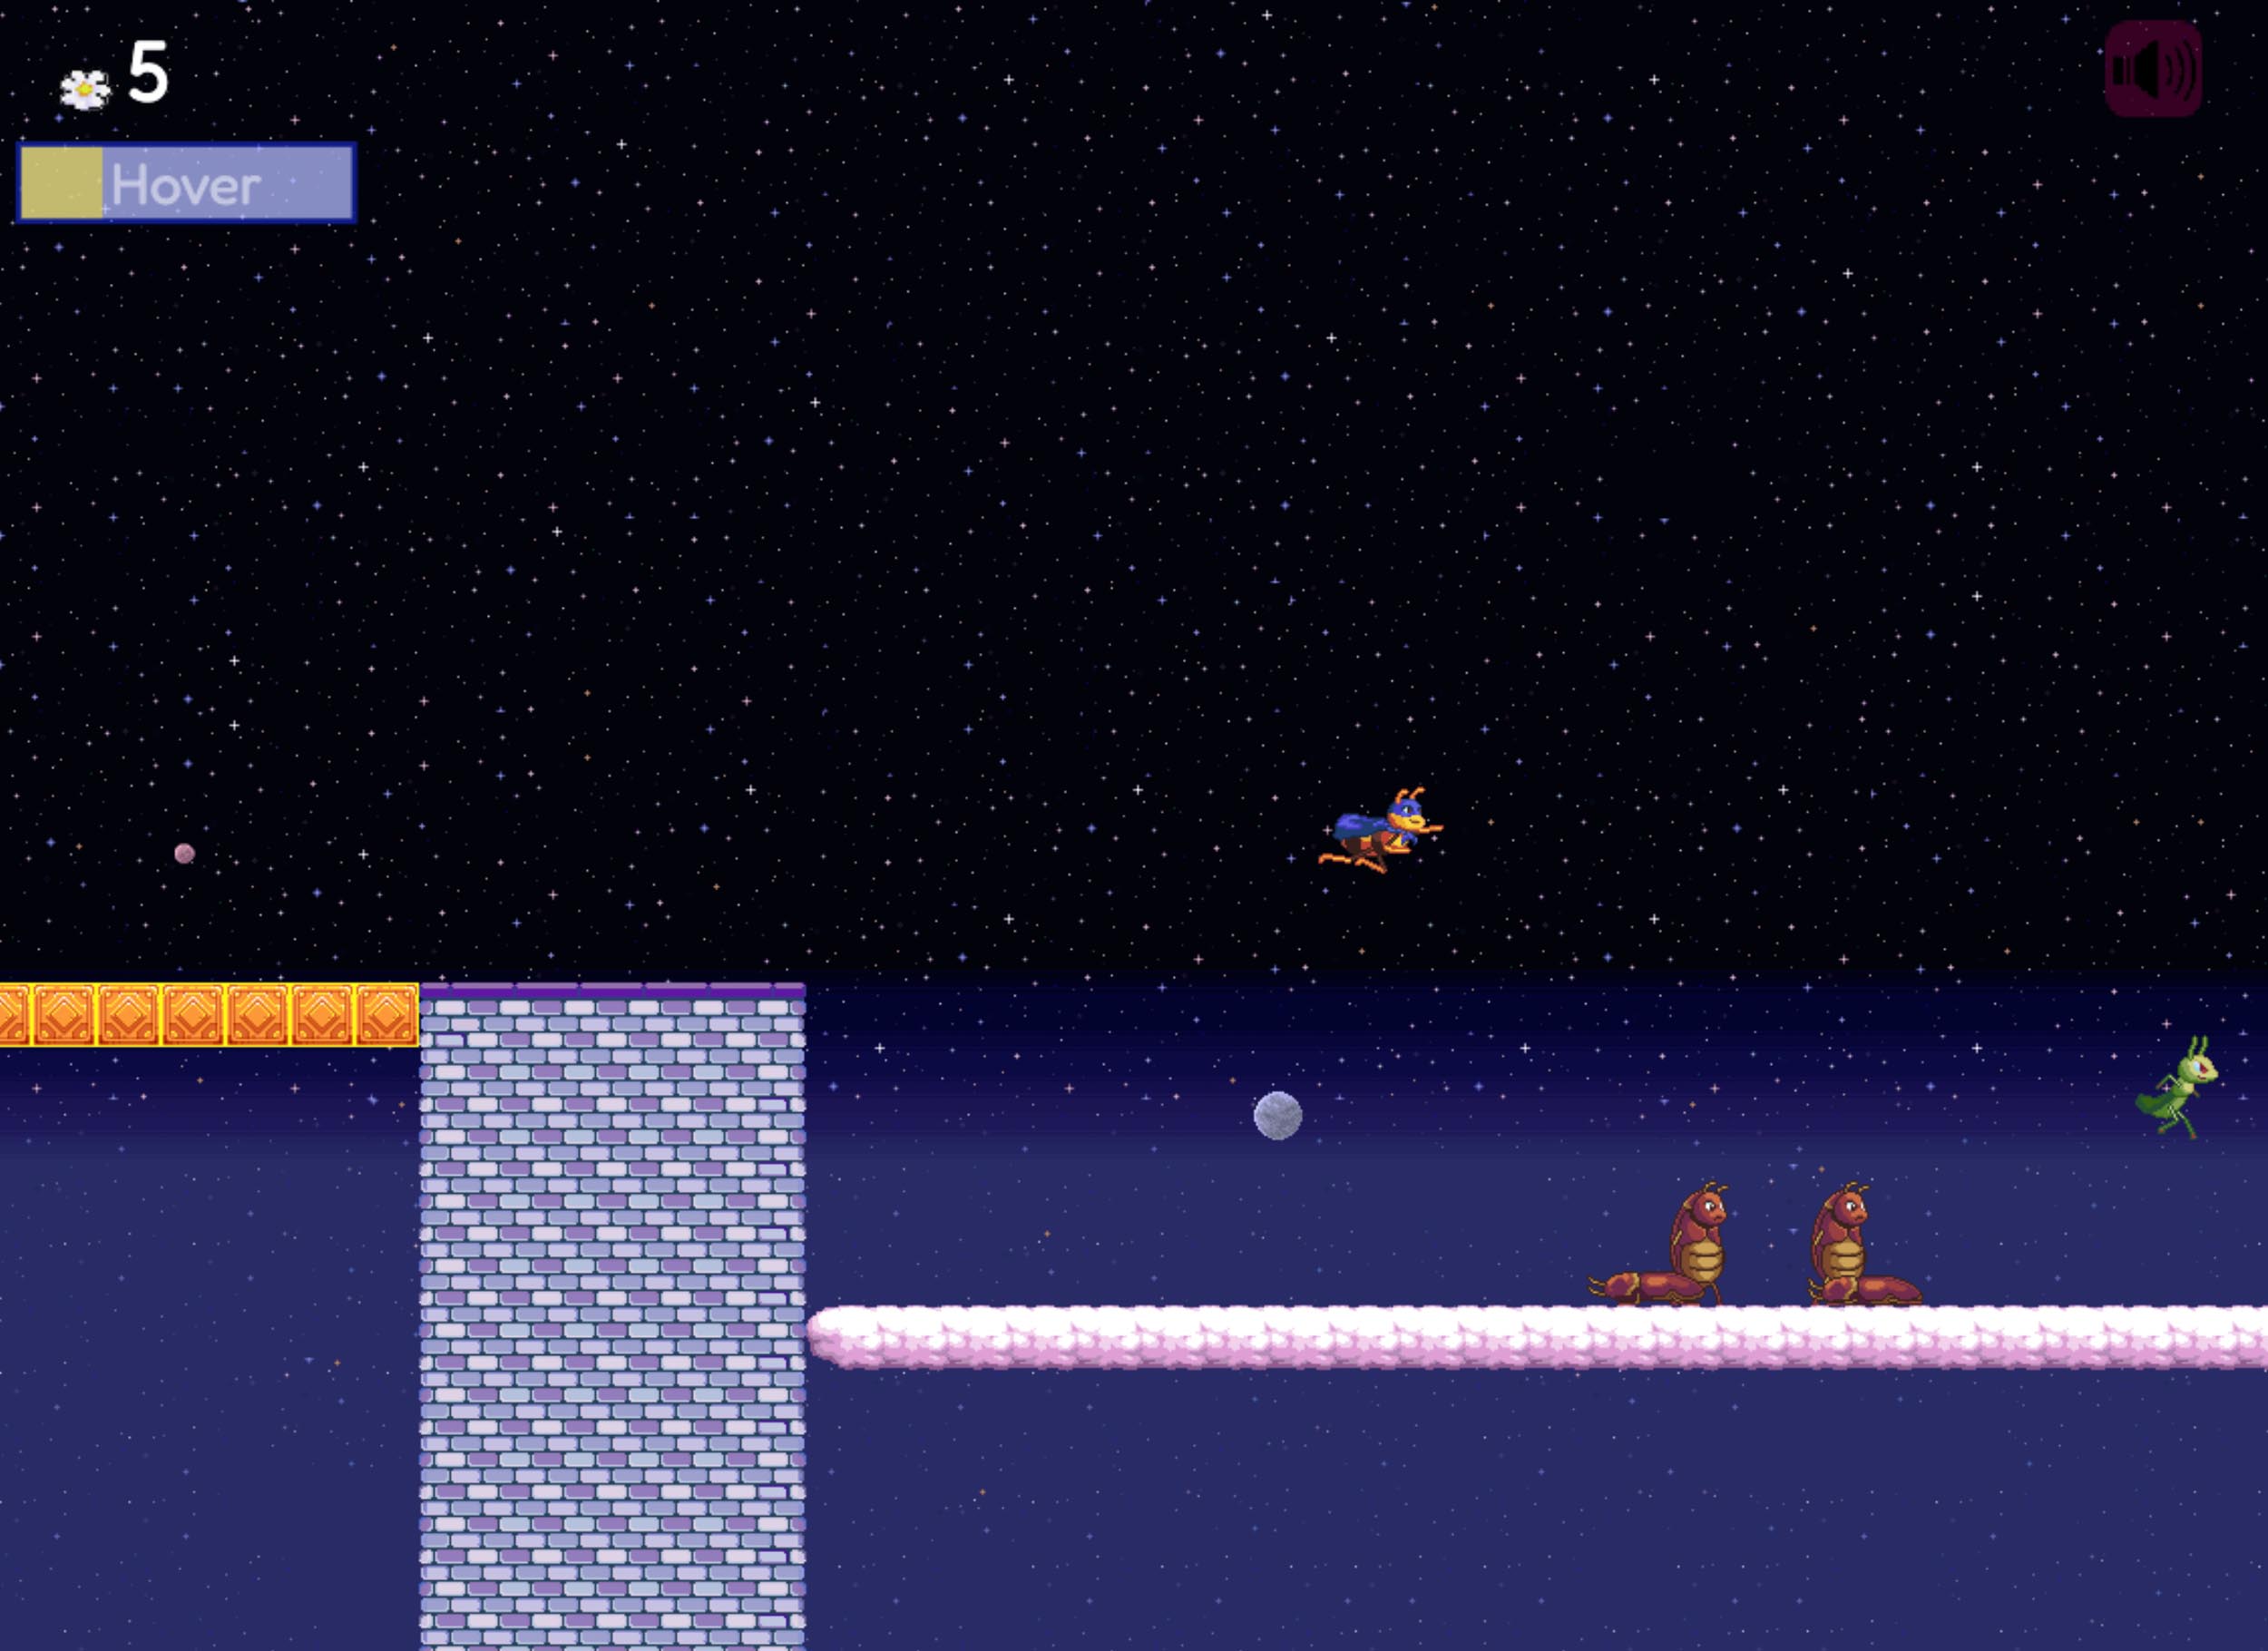 This is a screenshot from Homophone Bee. The player is flying above a cloud surface in outer space with several cockroaches below.